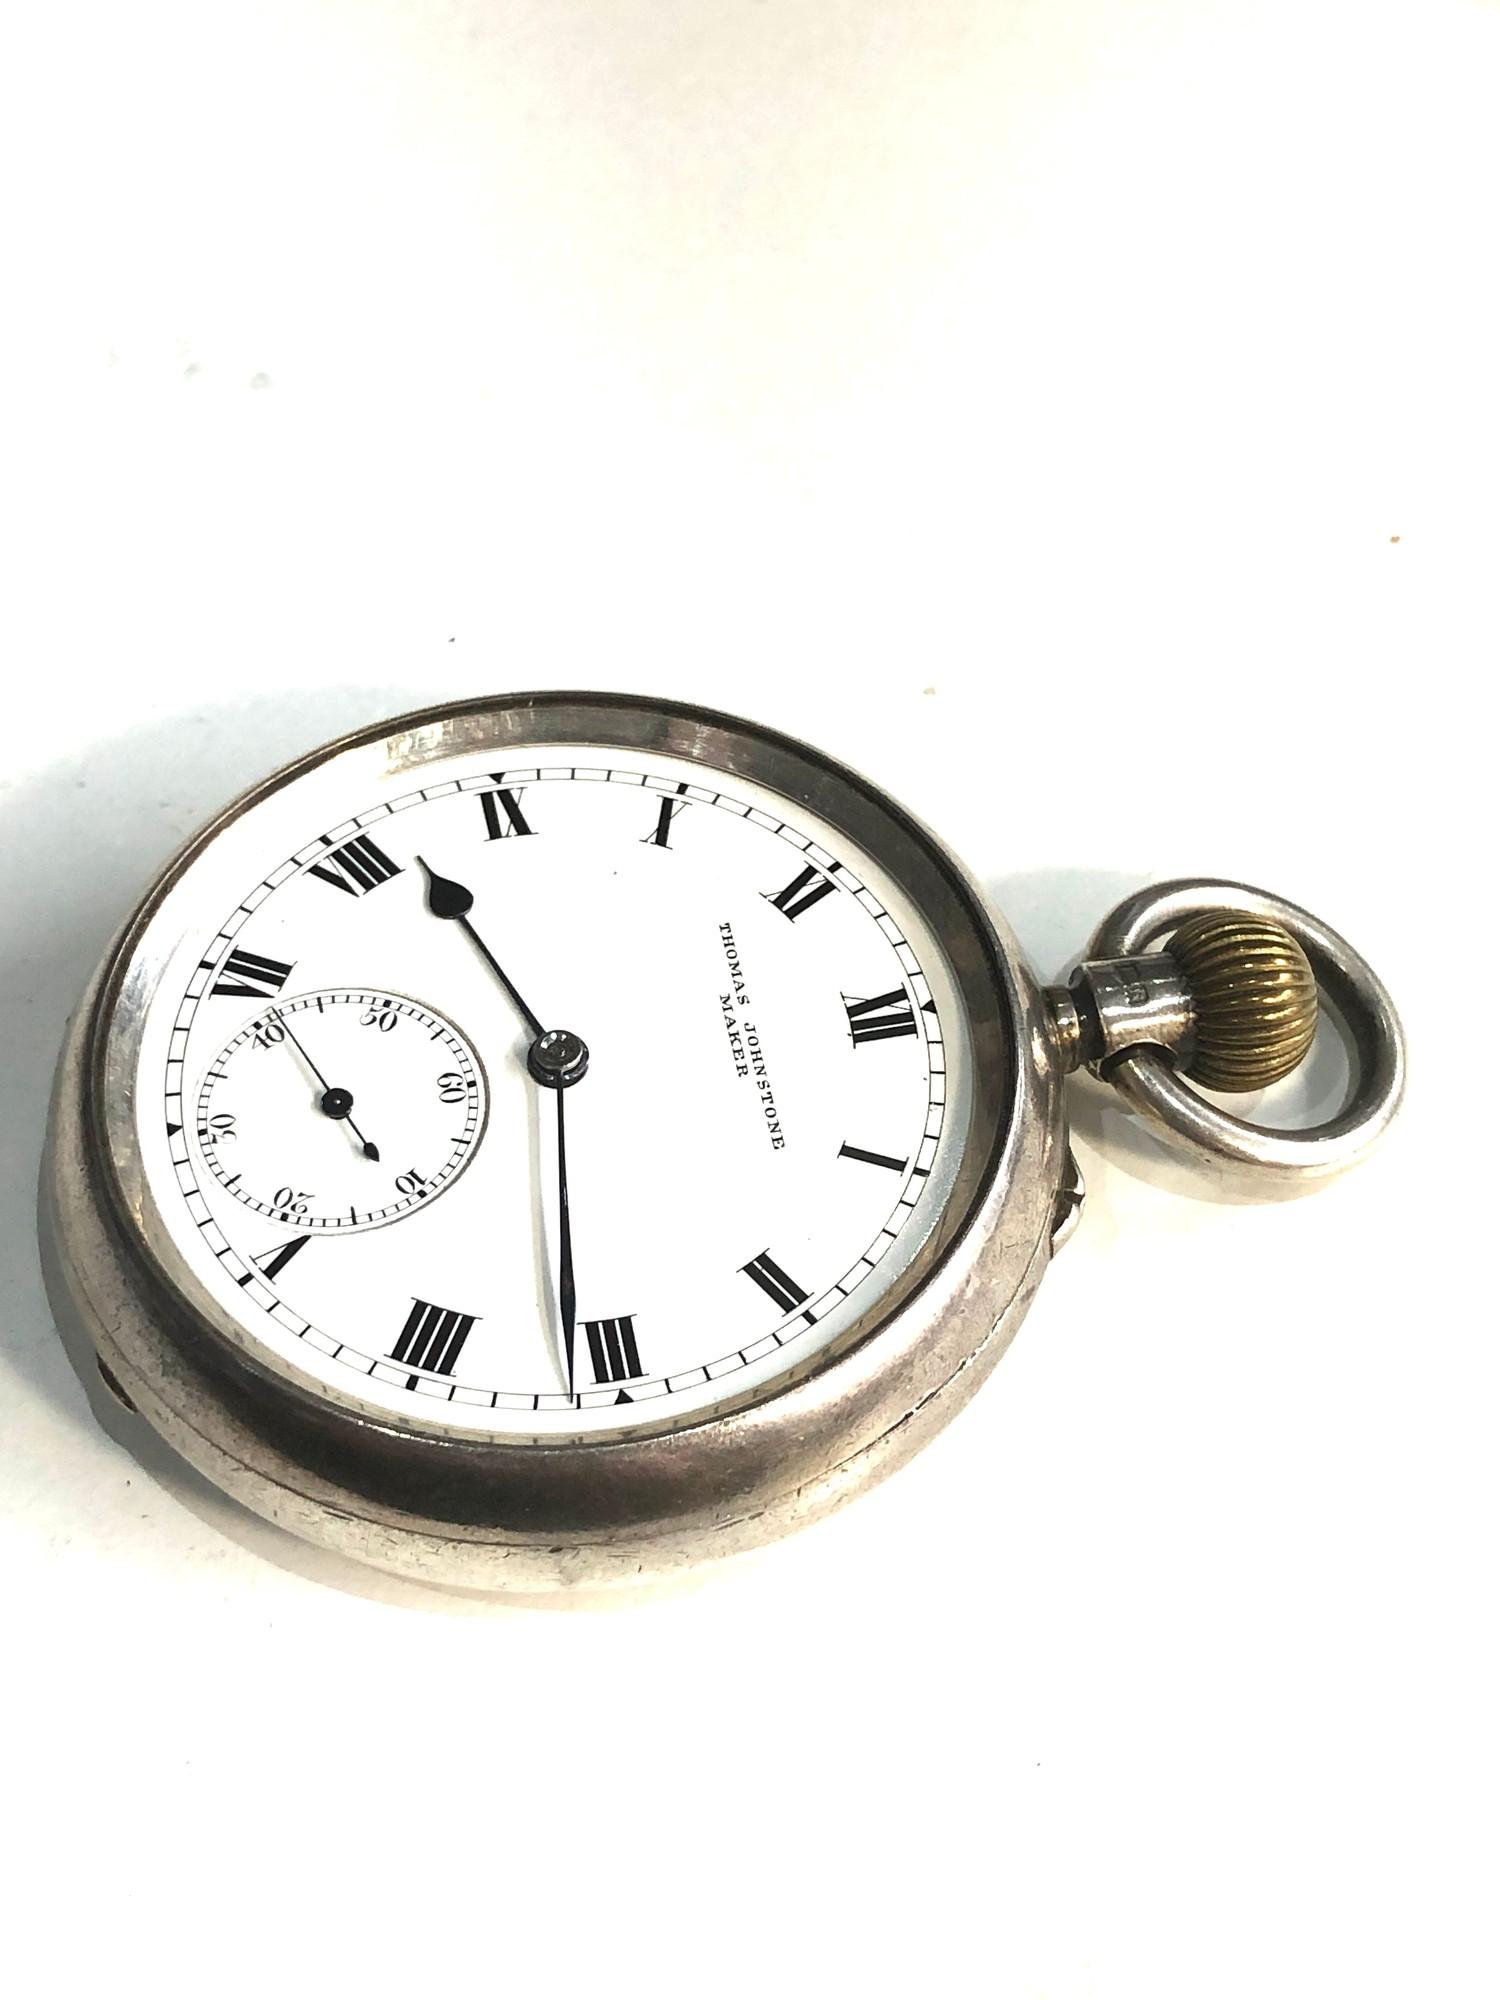 Antique silver open face pocket thomas johnstone glasgow the watch is ticking but no warranty - Image 2 of 5